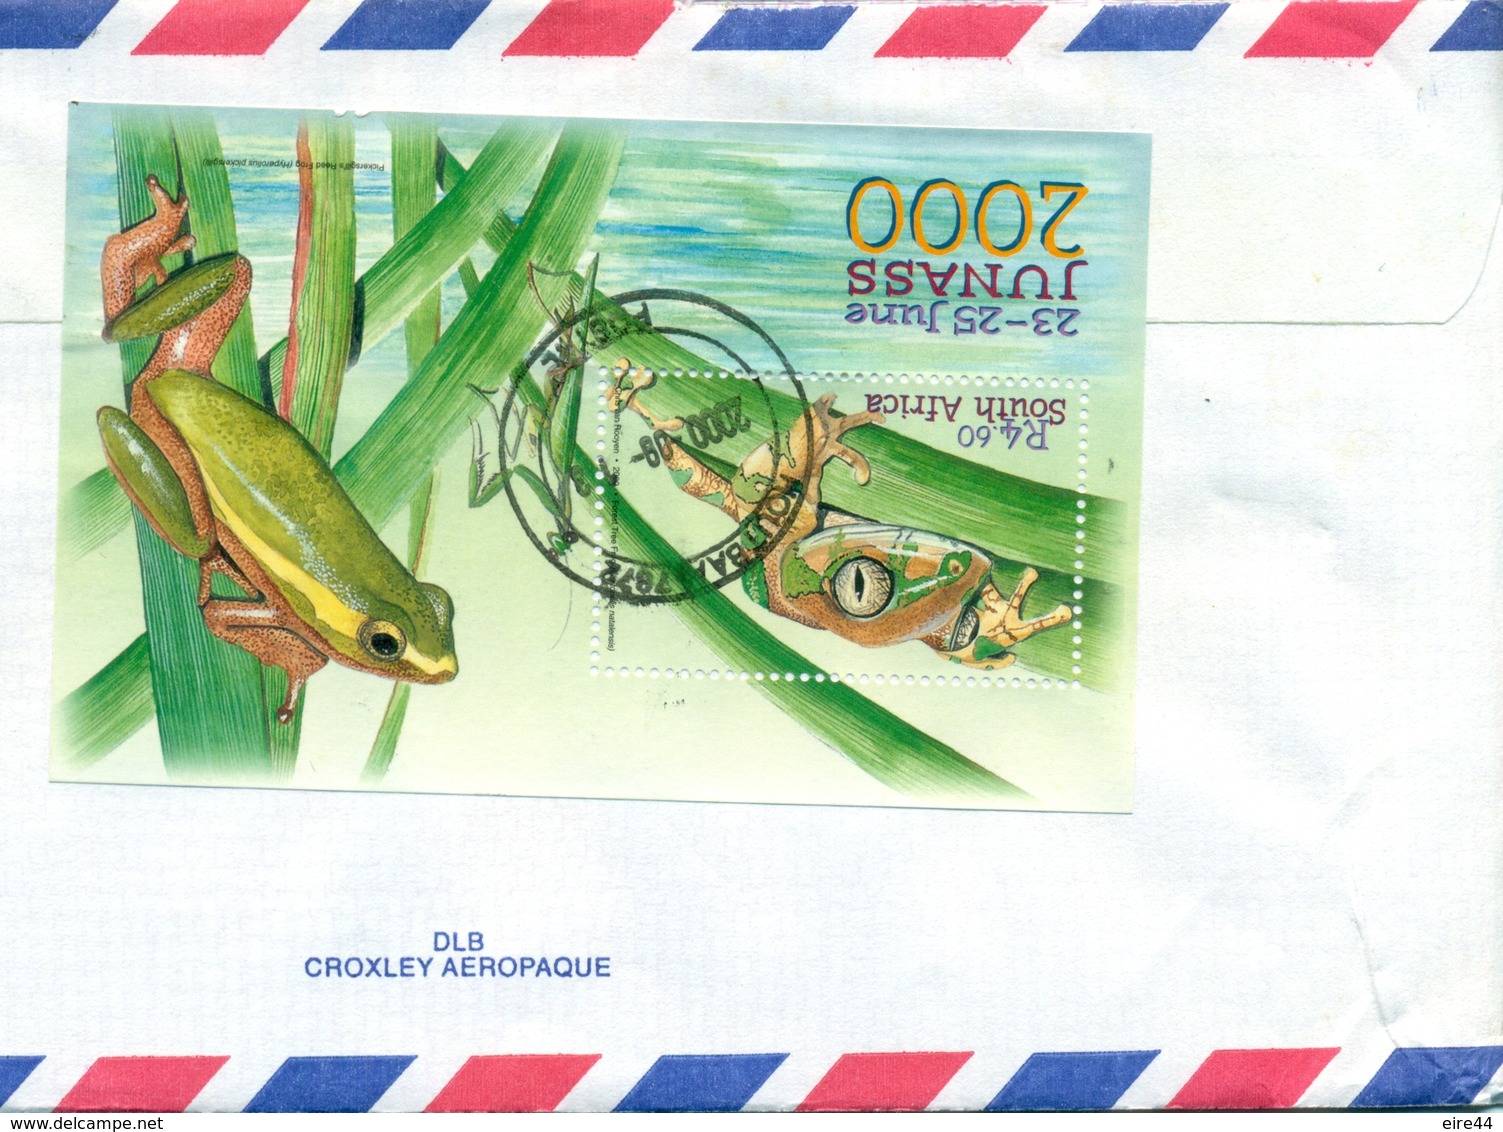 South Africa 1992 11 Covers Cape Town Christmas Bicycle Postman Frog Nobel - Lettres & Documents